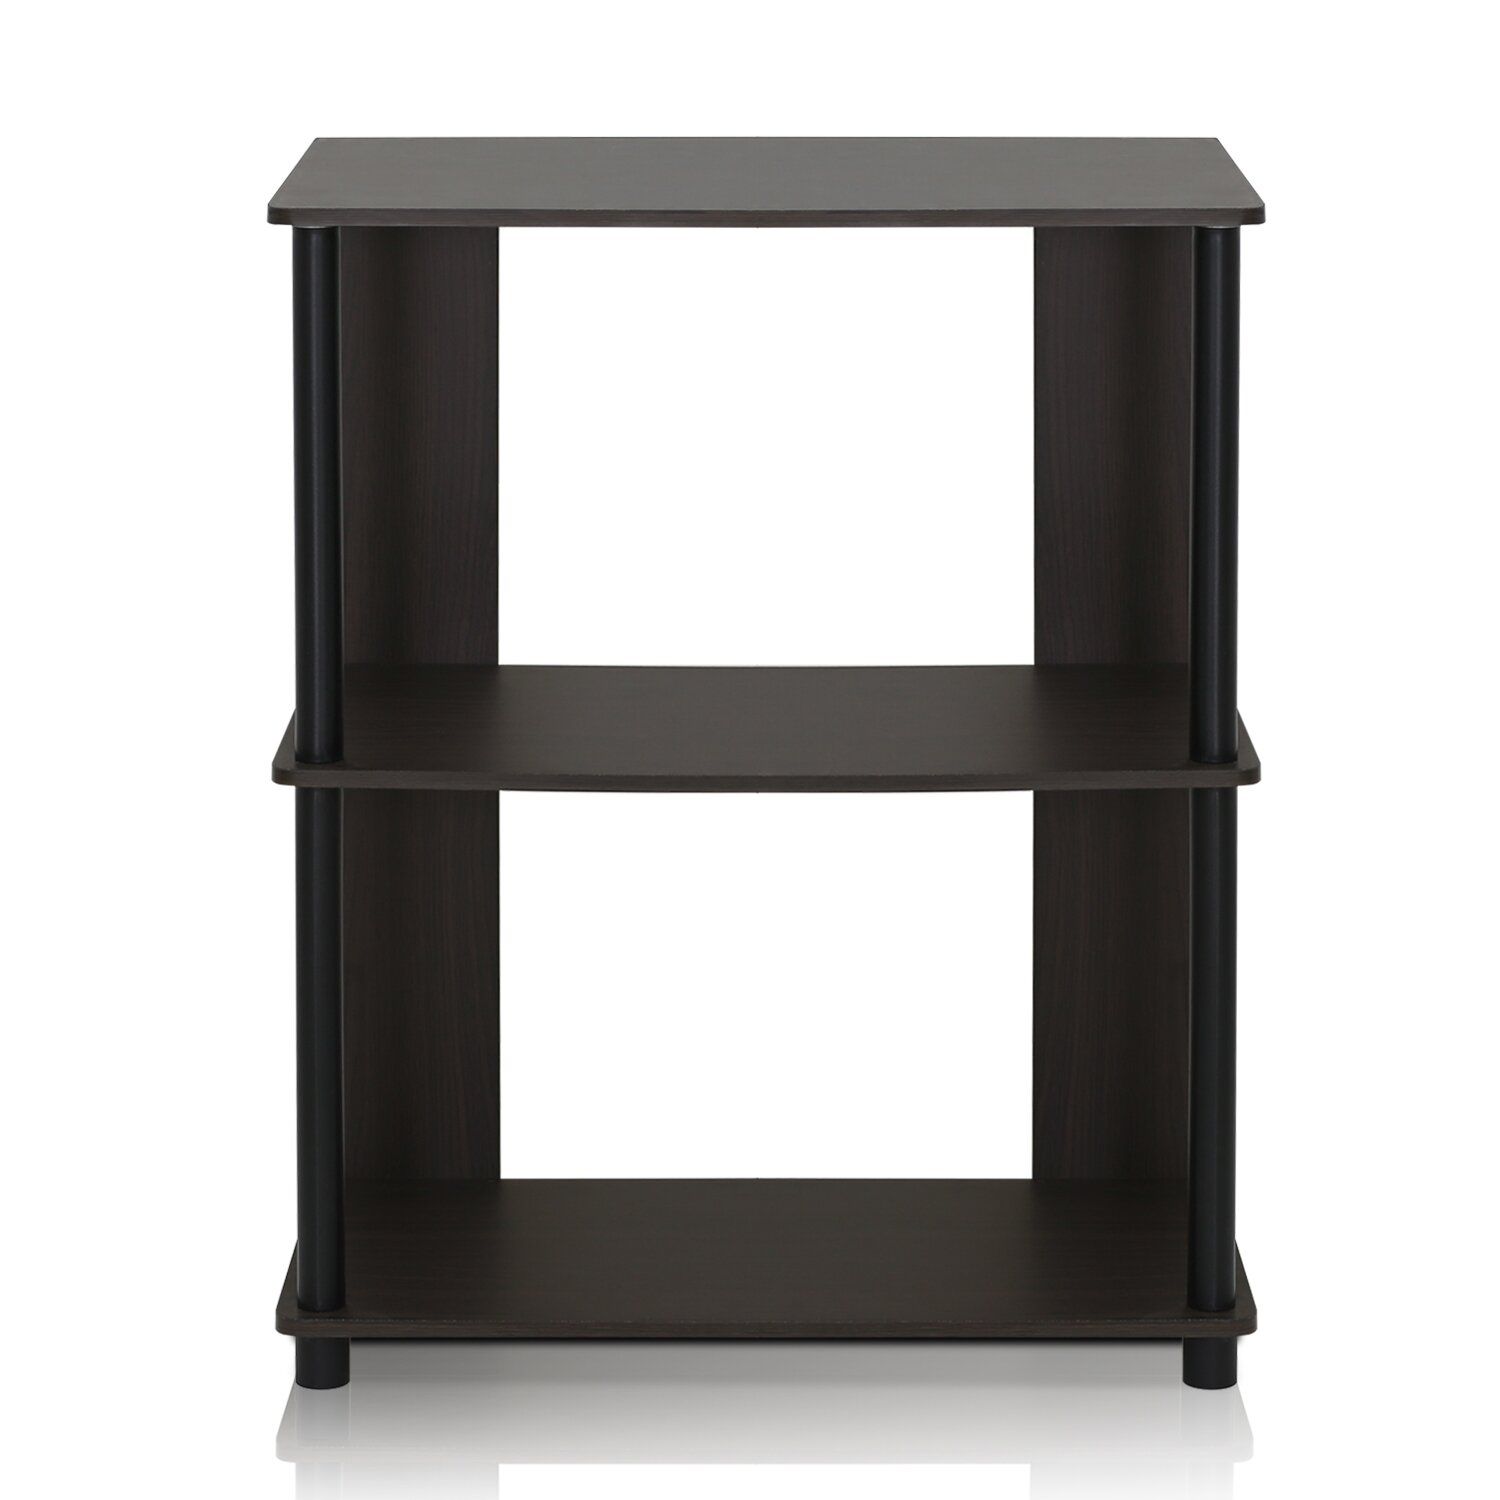 Furinno Furinno Jaya Simple Design 50" Tv Stand With Bins With Furinno Jaya Large Entertainment Center Tv Stands (View 13 of 15)